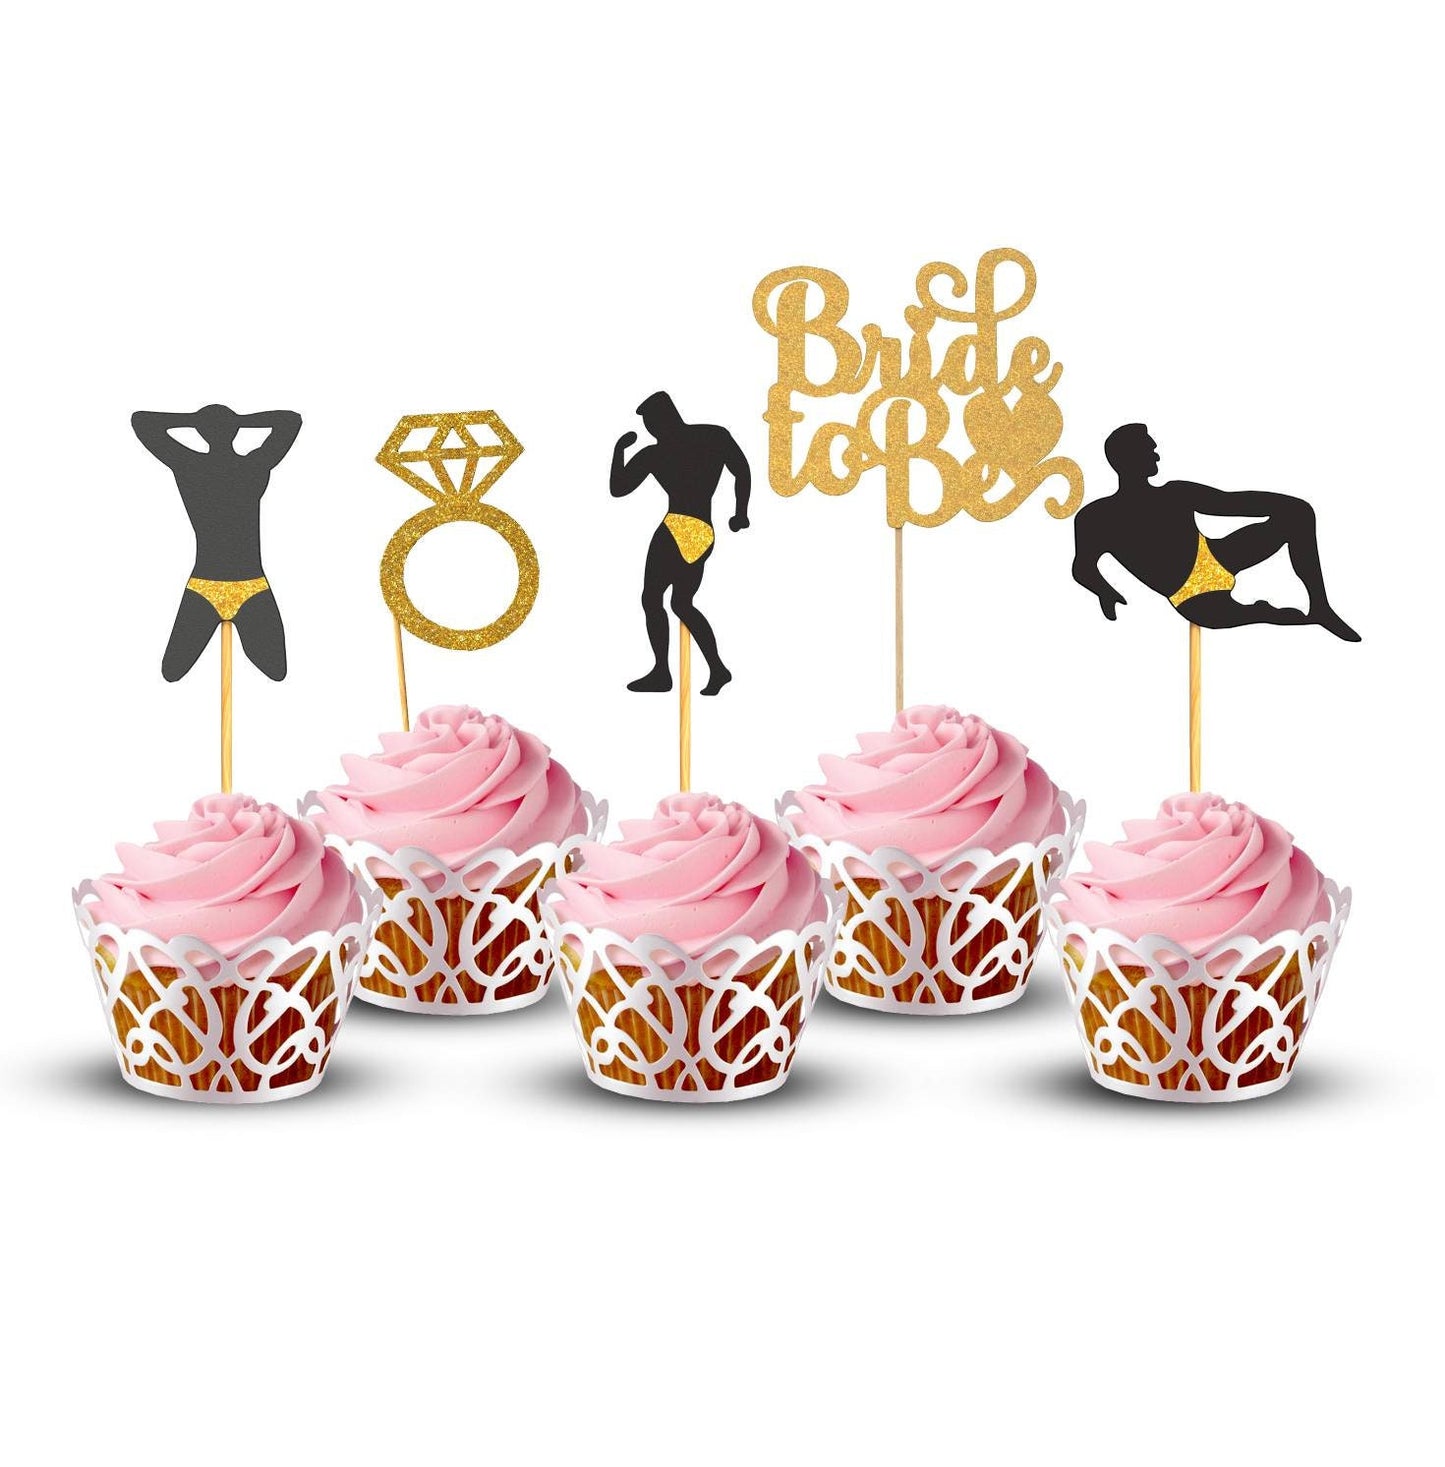 Bachelorette Party Decoration Supplies, Ring, Bride to be Cake Topper , Straws, Banner, Mimosa Bar Gold, Cupcake Toppers